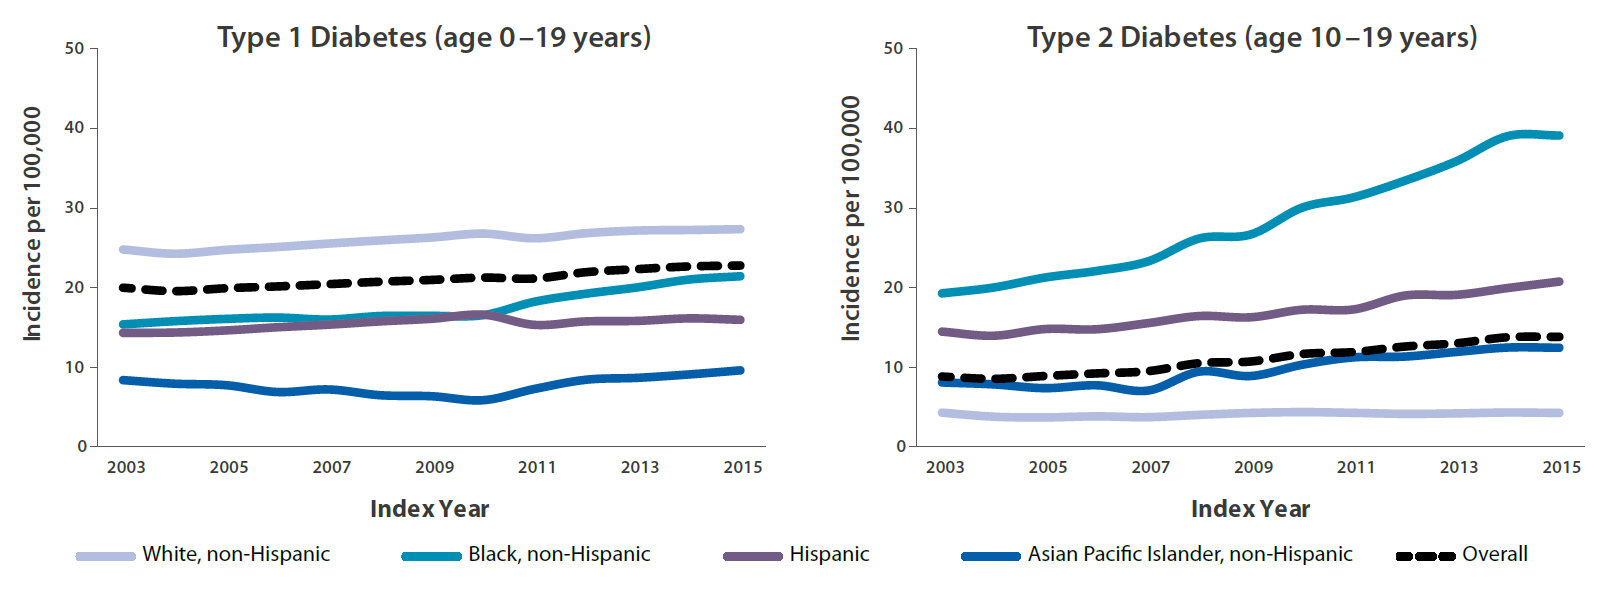 Line chart displaying Type 1 Diabetes age 0-19 years old from years 2003 to 2015 with White, non-Hispanic having the most incidences and Asian Pacific Islander, non-Hispanic having the least. Another line chart displaying Type 2 Diabetes ages 10 to 19 years old during the years 2003 to 2015 with Black, non-Hispanic leading the number of incidences and White, non-Hispanic with the least incidences.